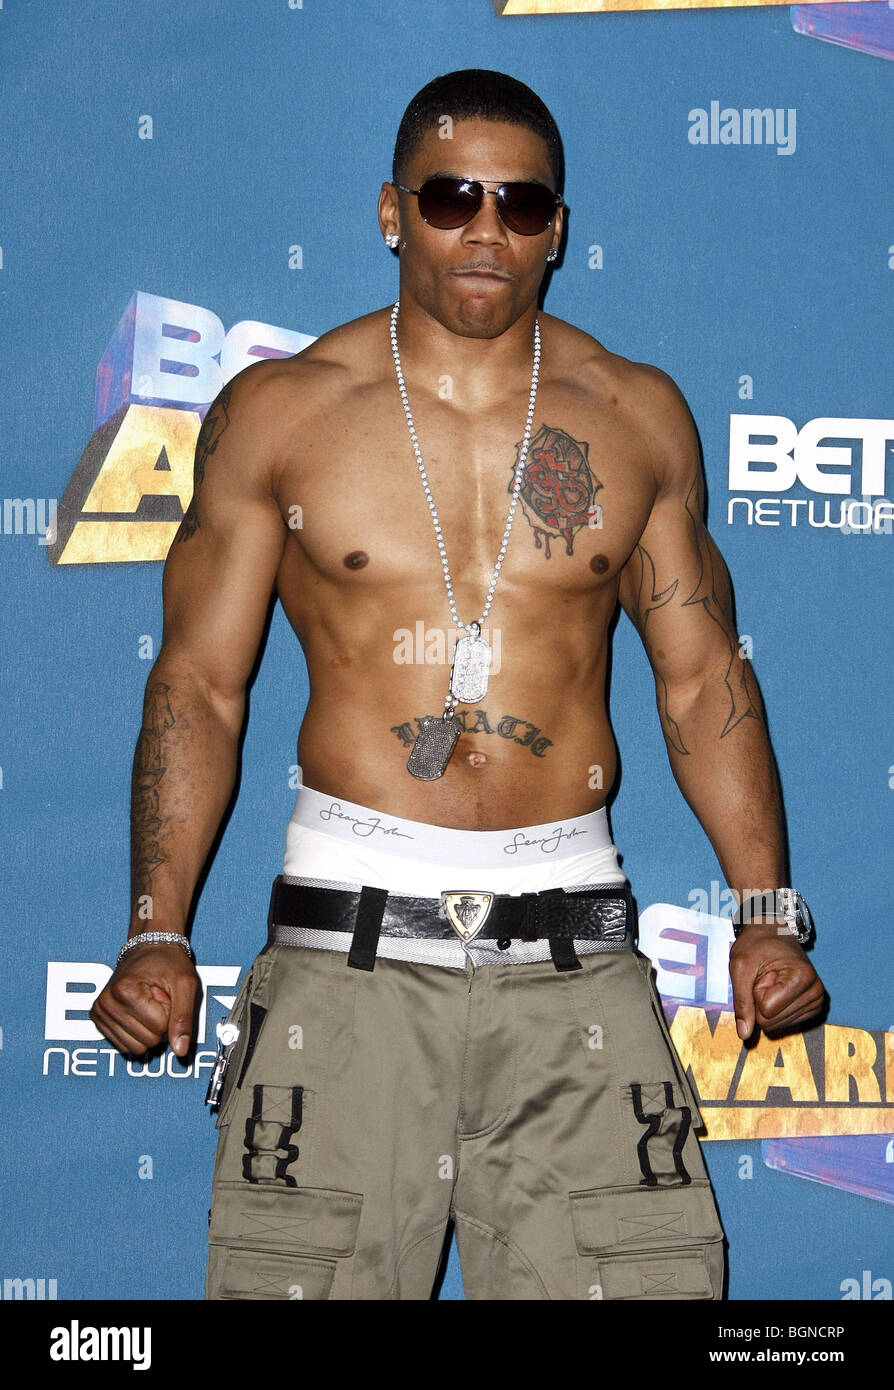 NELLY BET AWARDS 08 PRESSROOM SHRINE DOWNTOWN LOS ANGELES USA 24 June 2008 Stock Photo